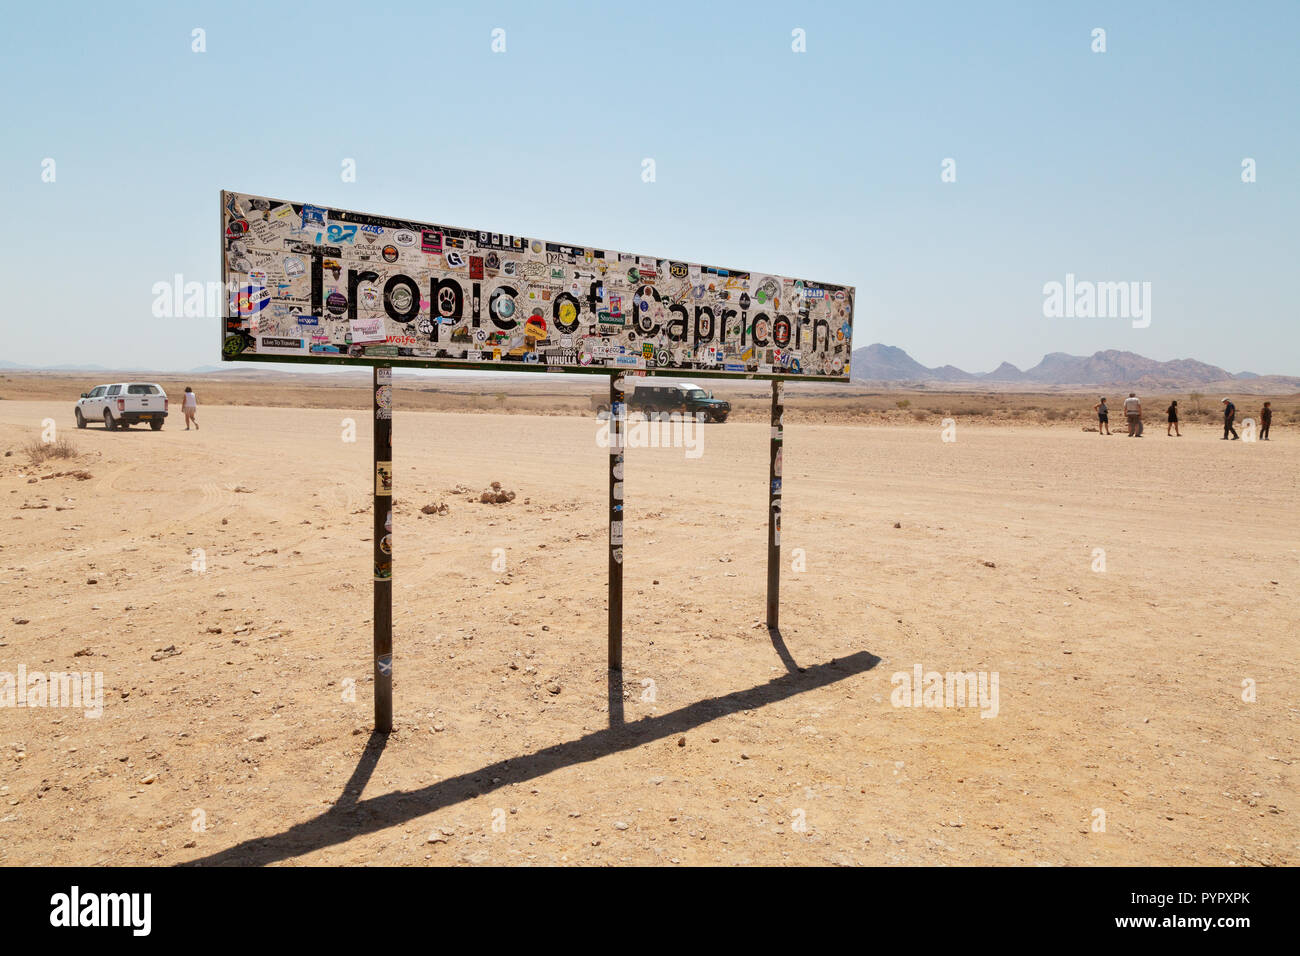 Tropic of Capricorn  Namibia - Tourists at the Tropic of Capricorn sign in the Namib Desert, Namibia Africa Stock Photo